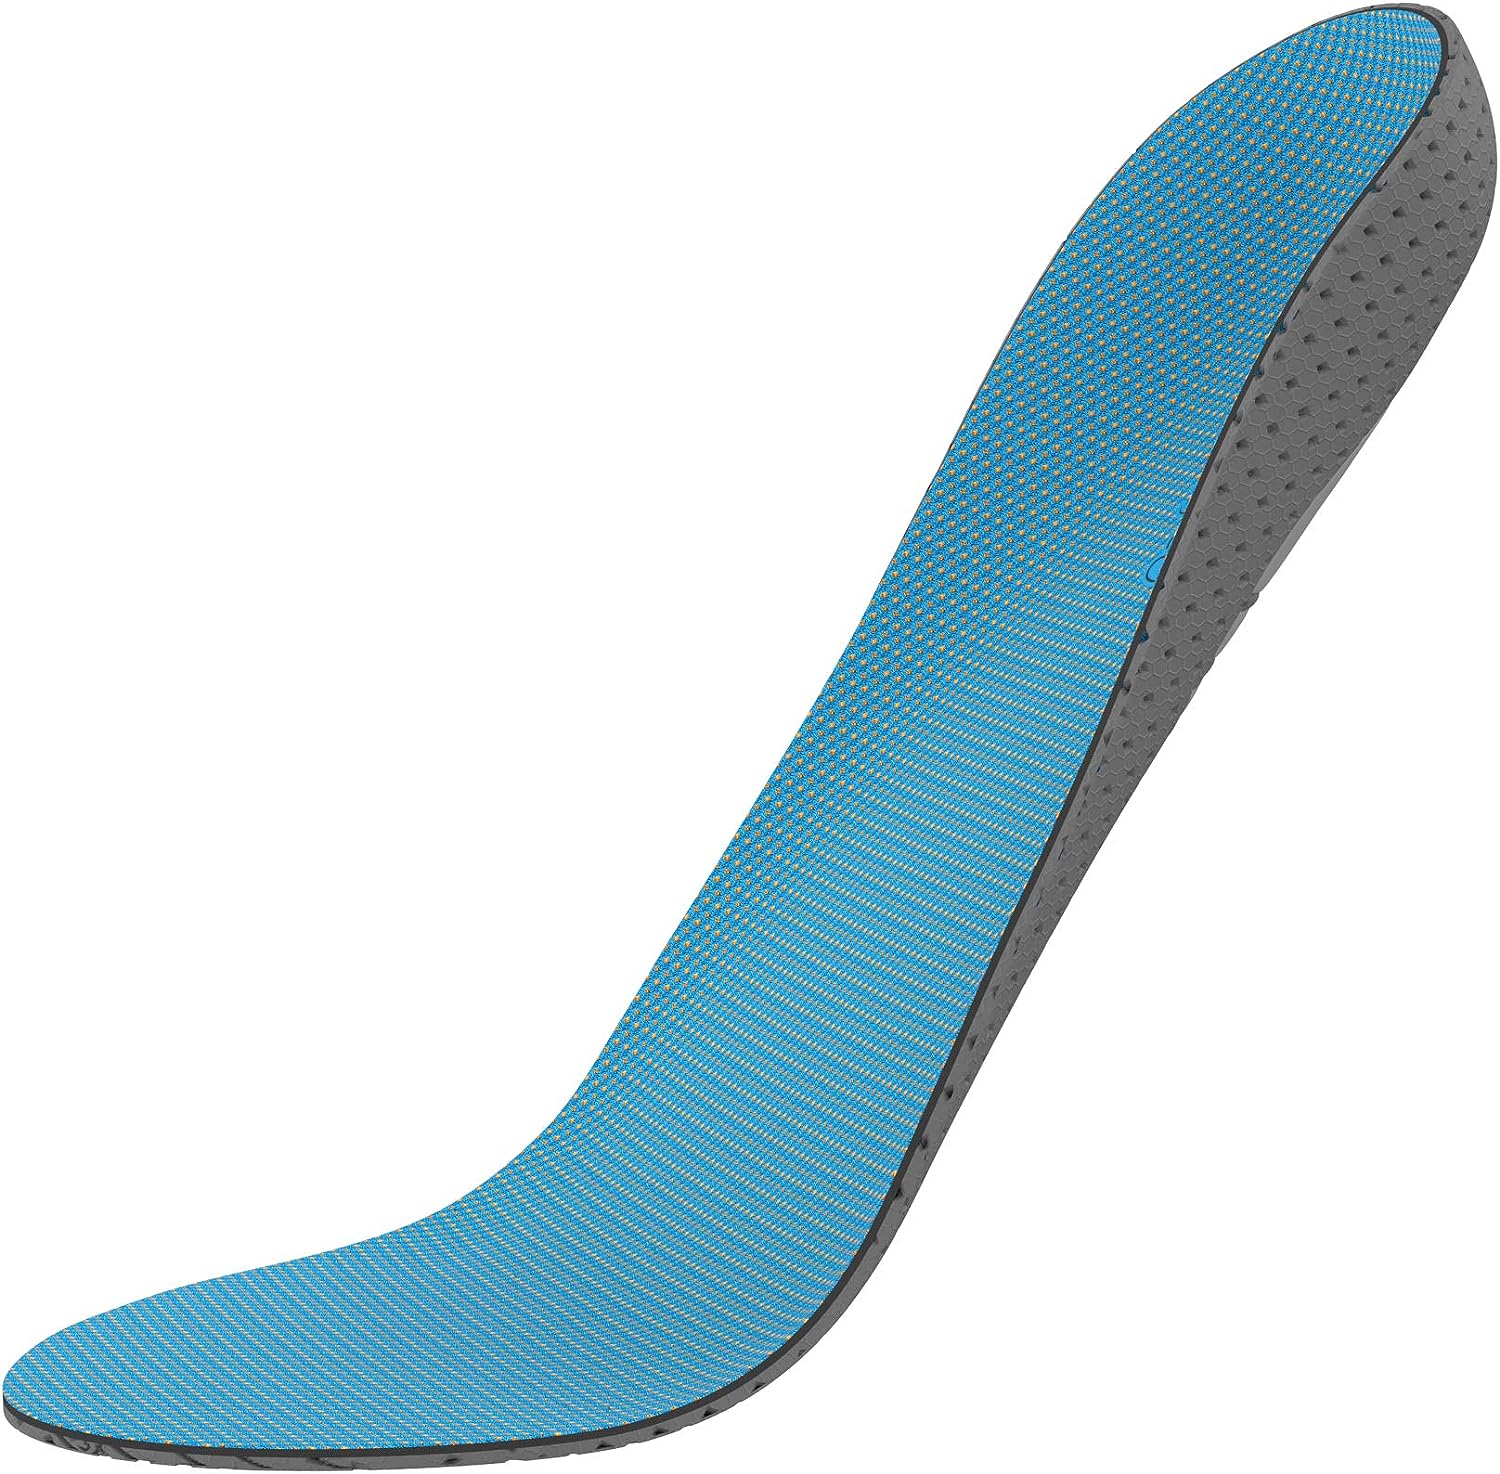 bonmedico High Performance Gel Insoles for Sports & [...]